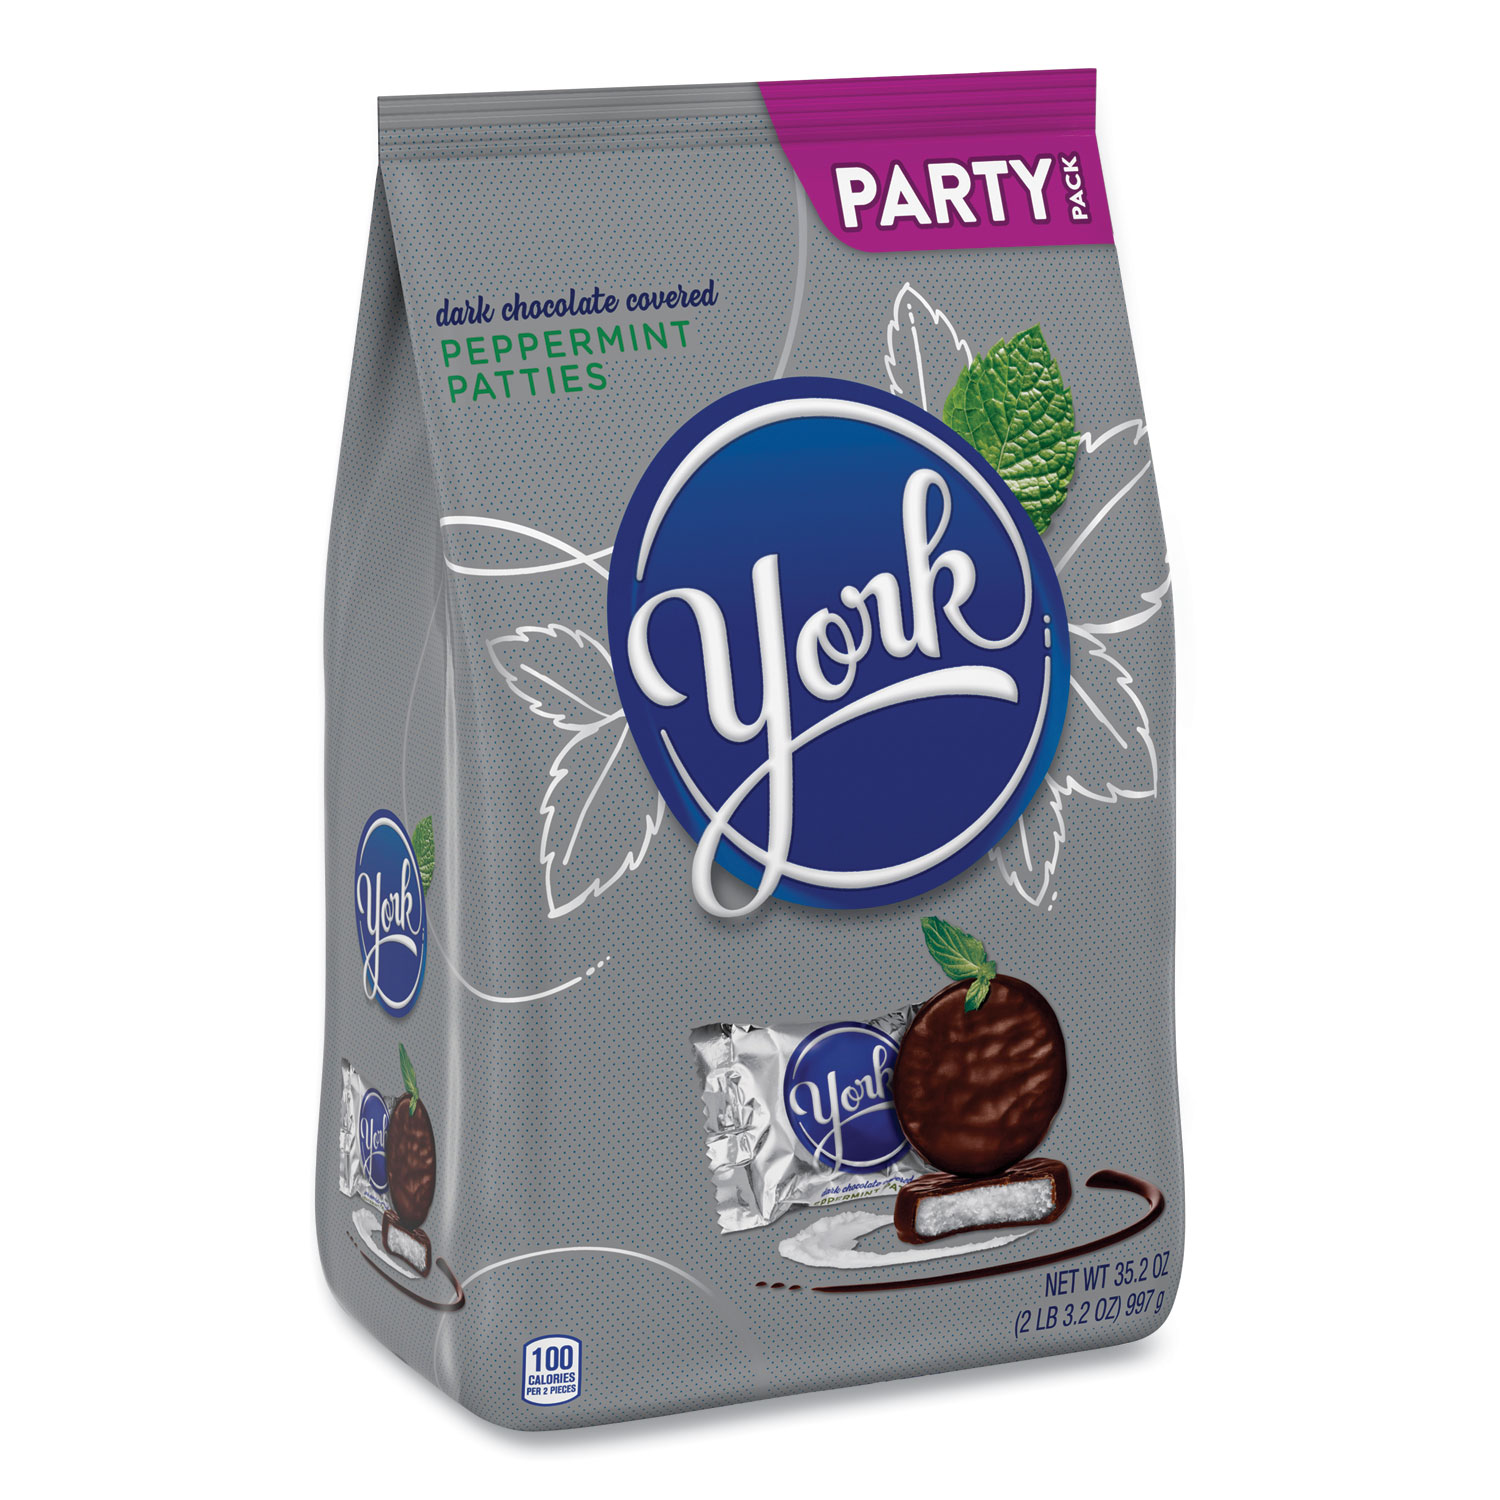  York 5811 Party Pack Peppermint Patties, Miniatures, 35.2 oz Bag, Free Delivery in 1-4 Business Days (GRR24600409) 